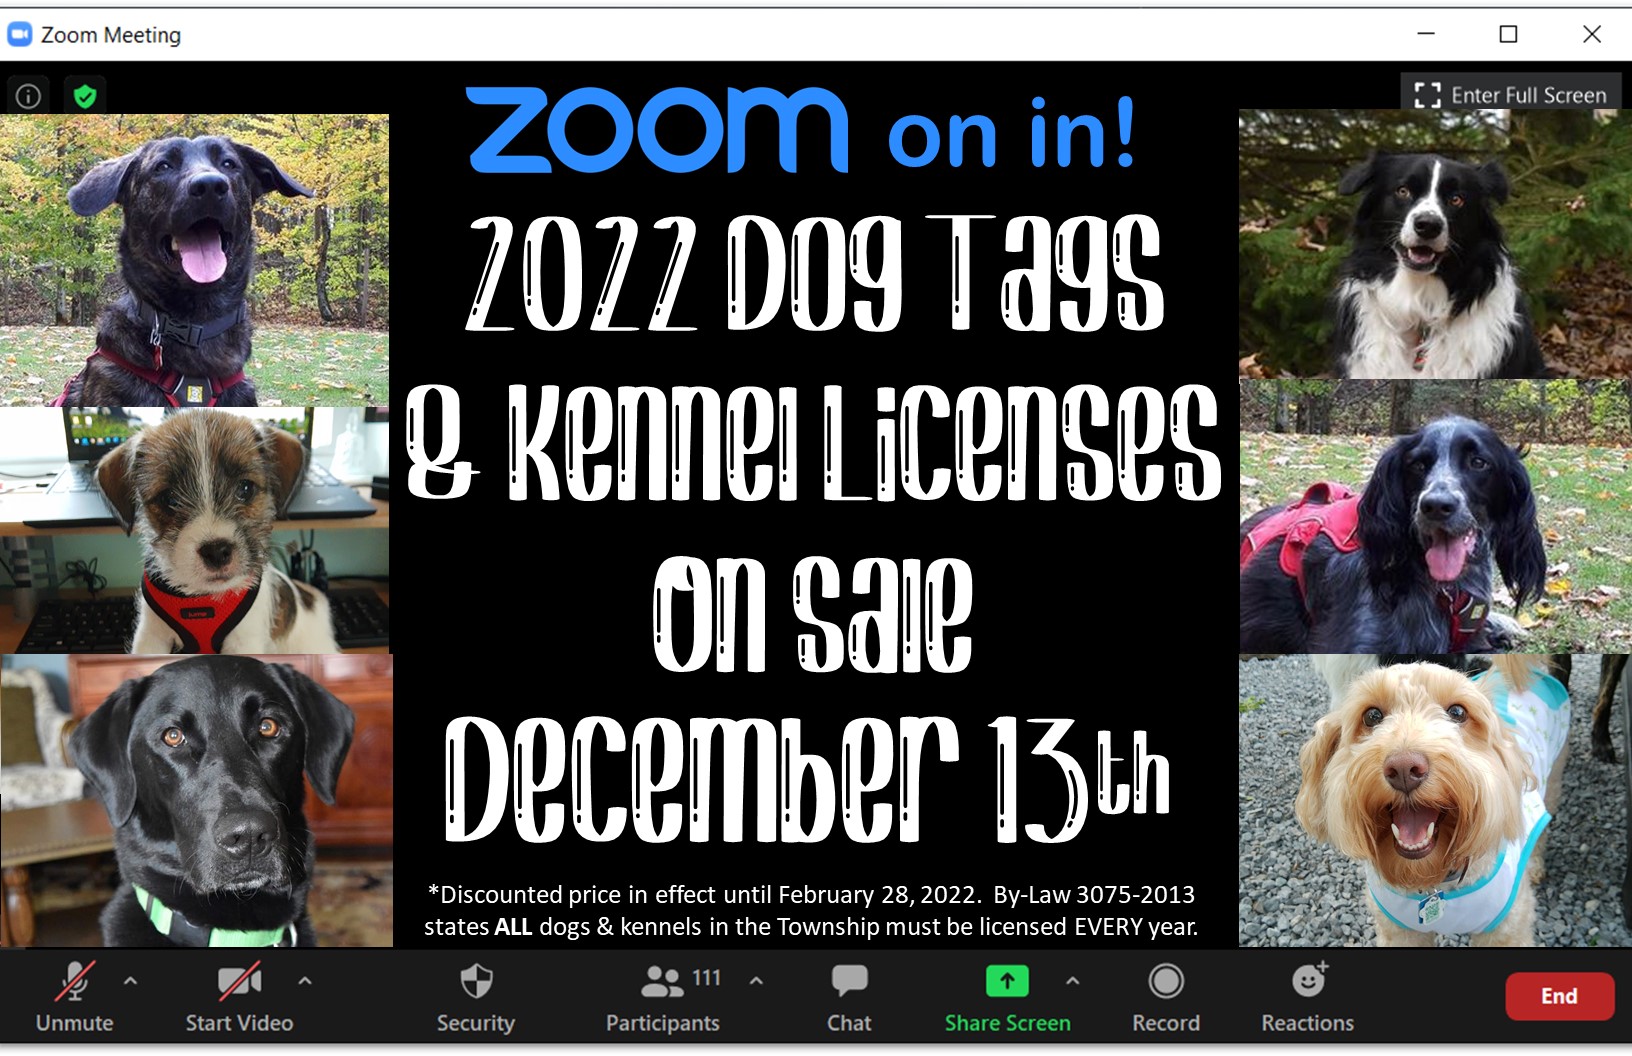 2022 dog tags and kennel licenses on sale december 13th